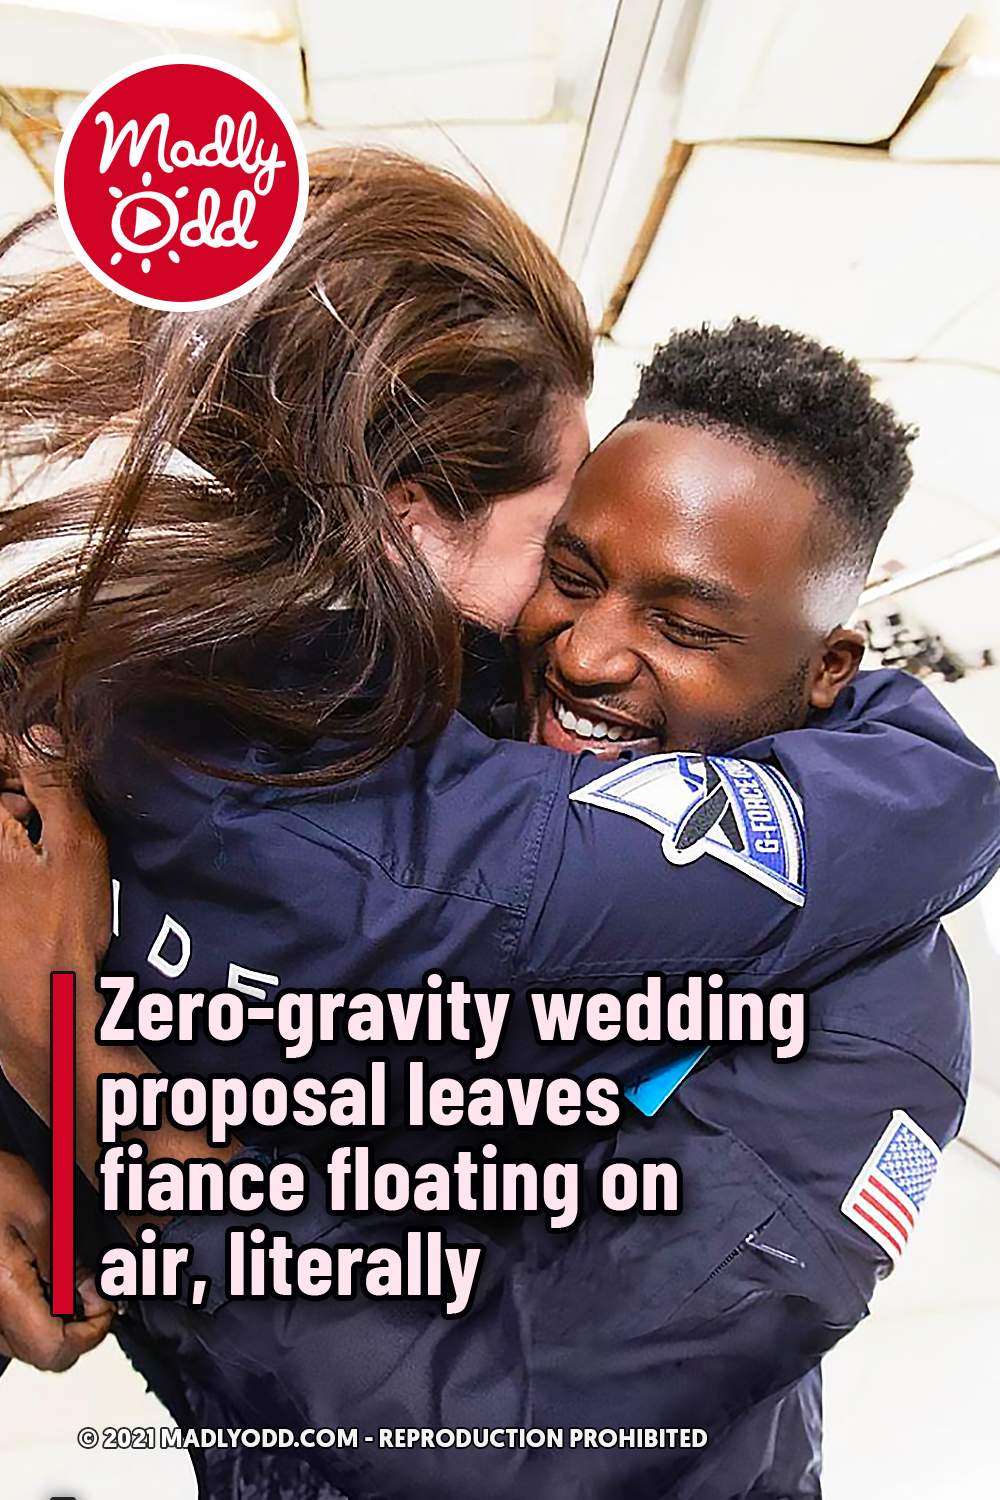 Zero-gravity wedding proposal leaves fiance floating on air, literally